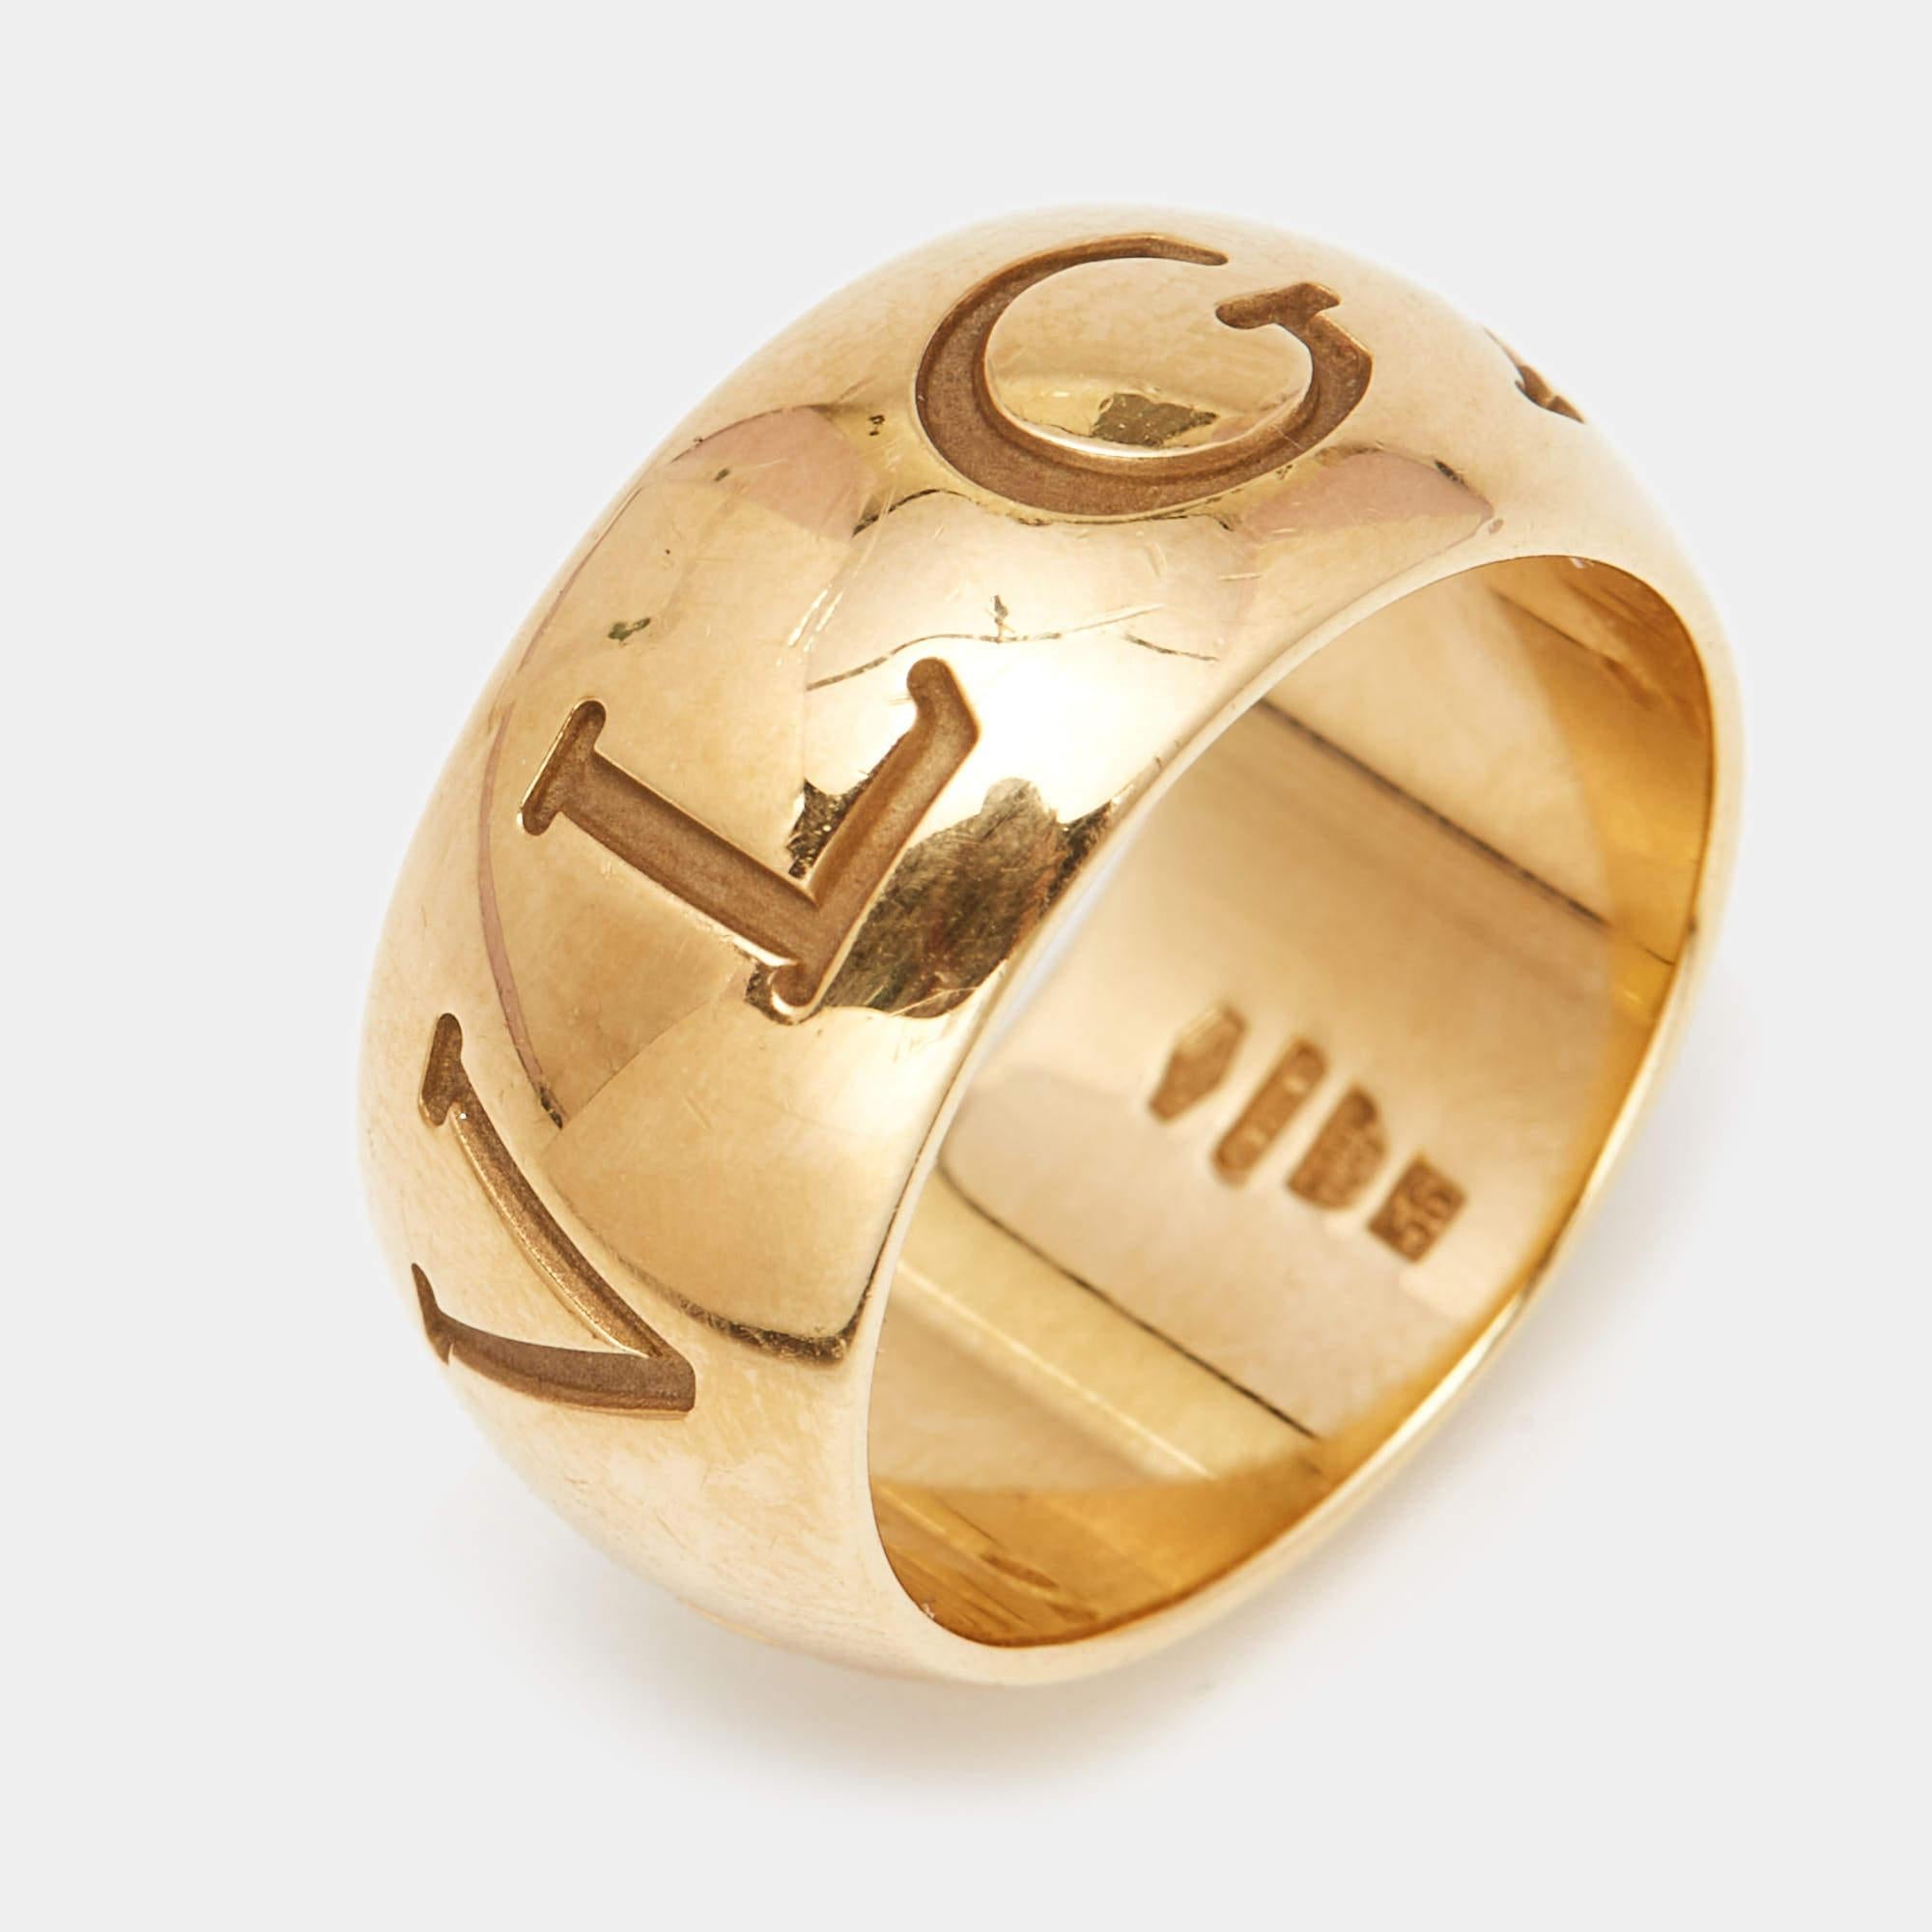 This Bvlgari Monologo ring will become a core piece of your jewelry collection. It is made from 18k yellow gold and detailed with the brand name.

